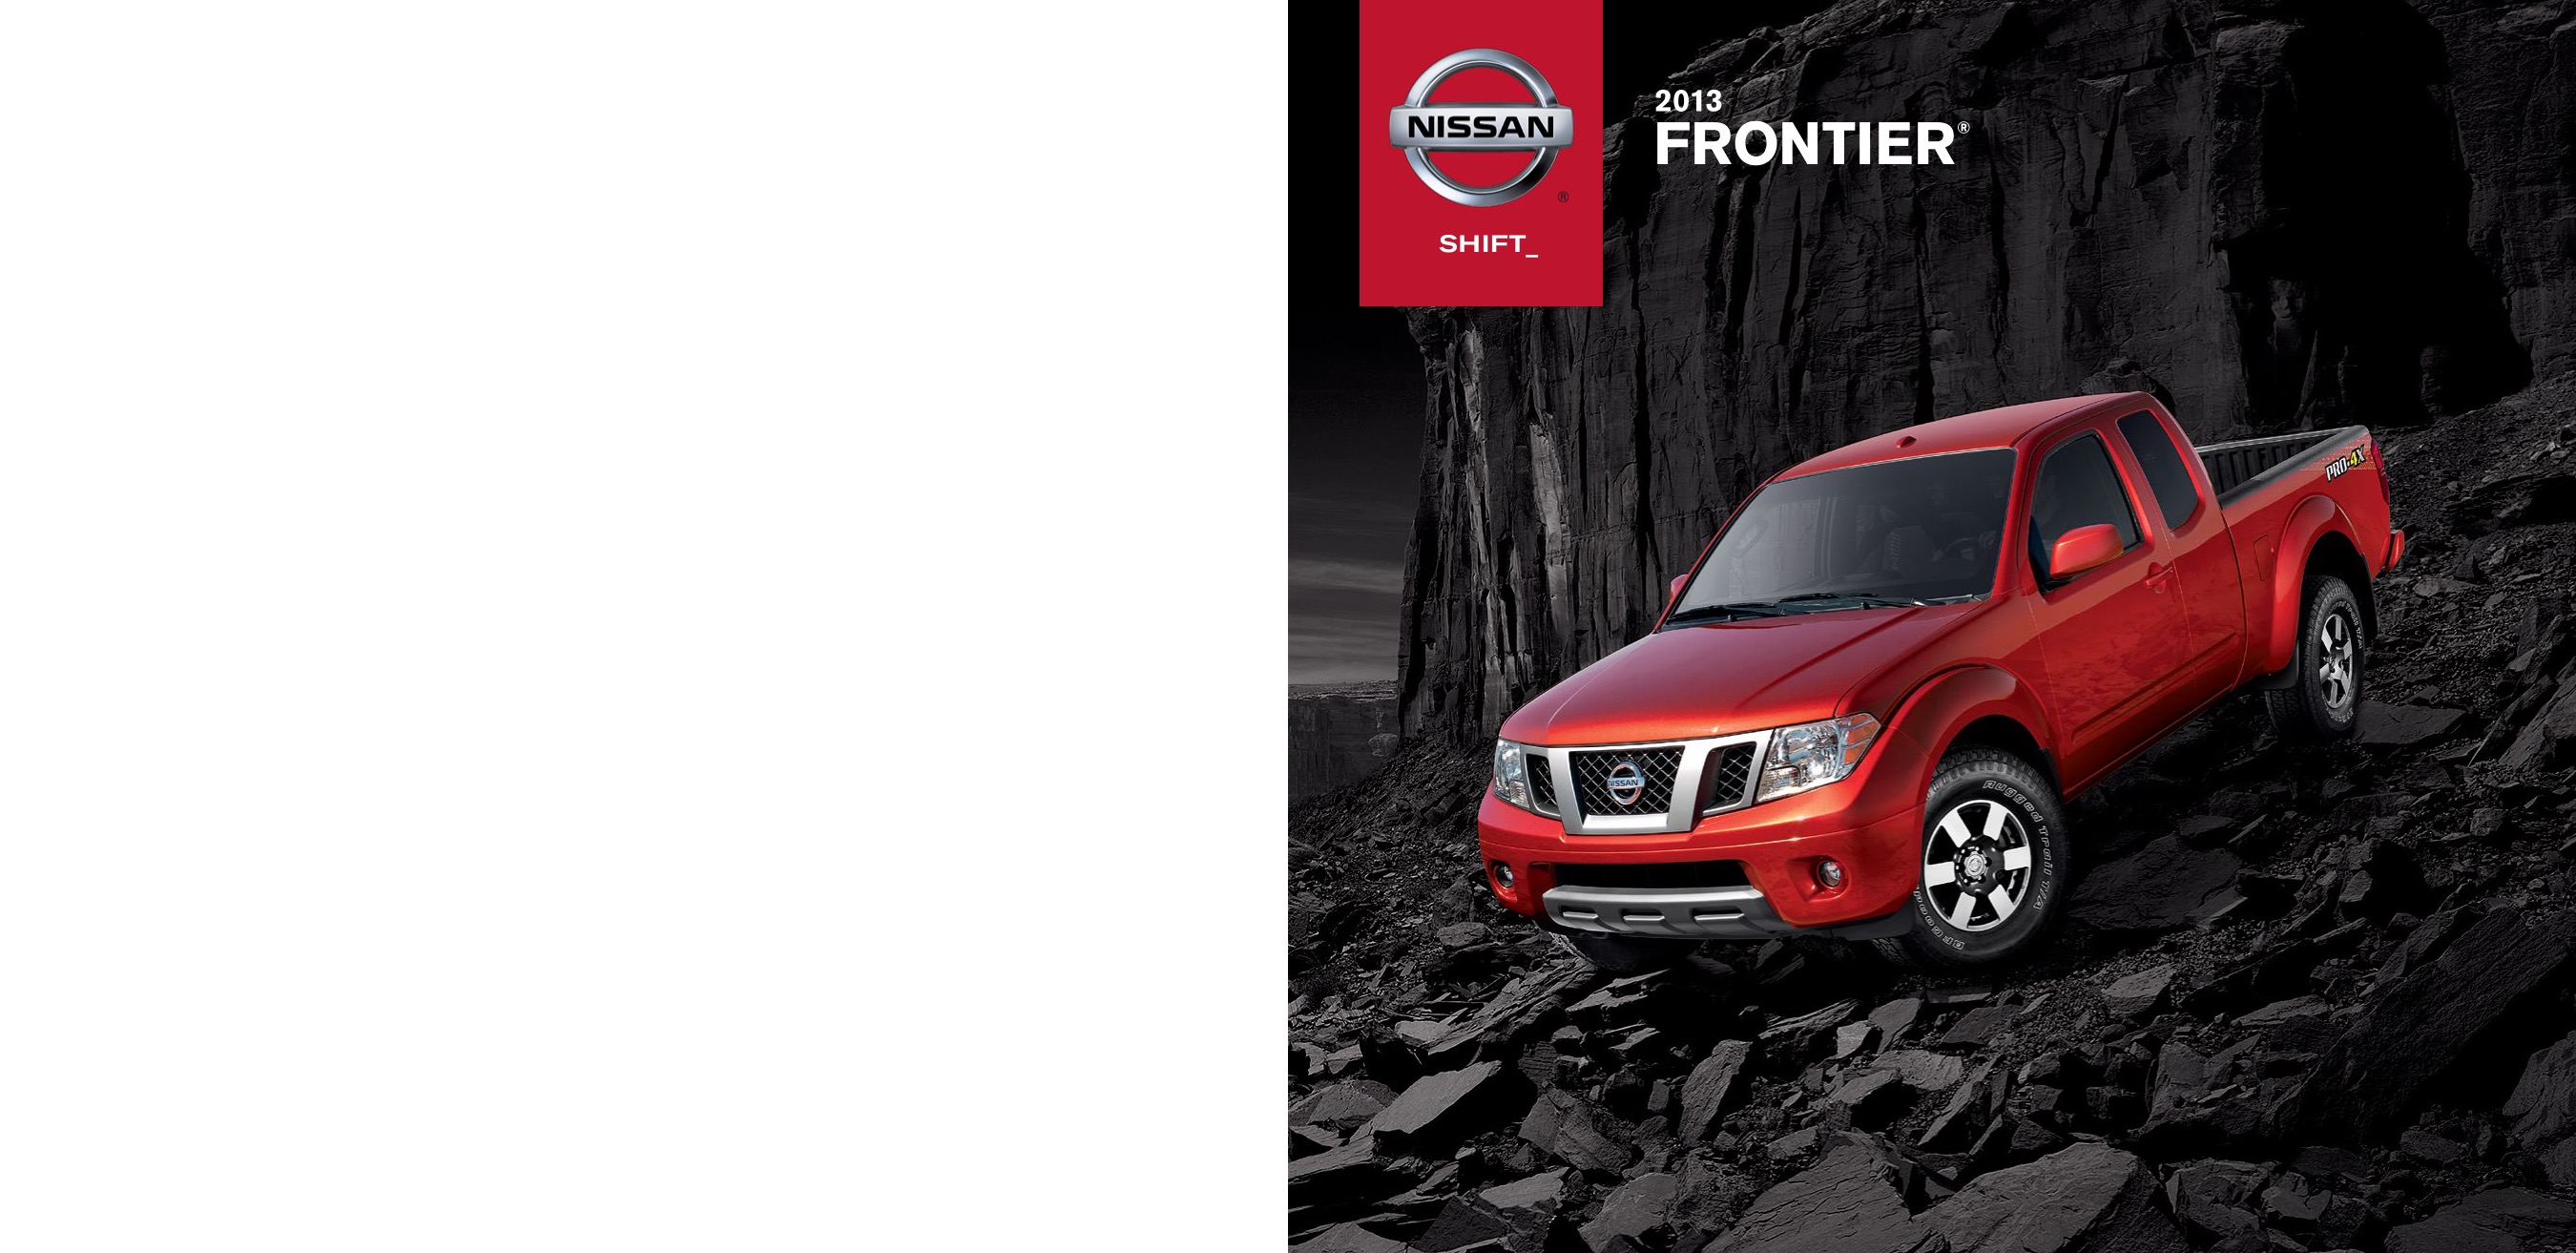 2013 Nissan Frontier Brochure Page 6